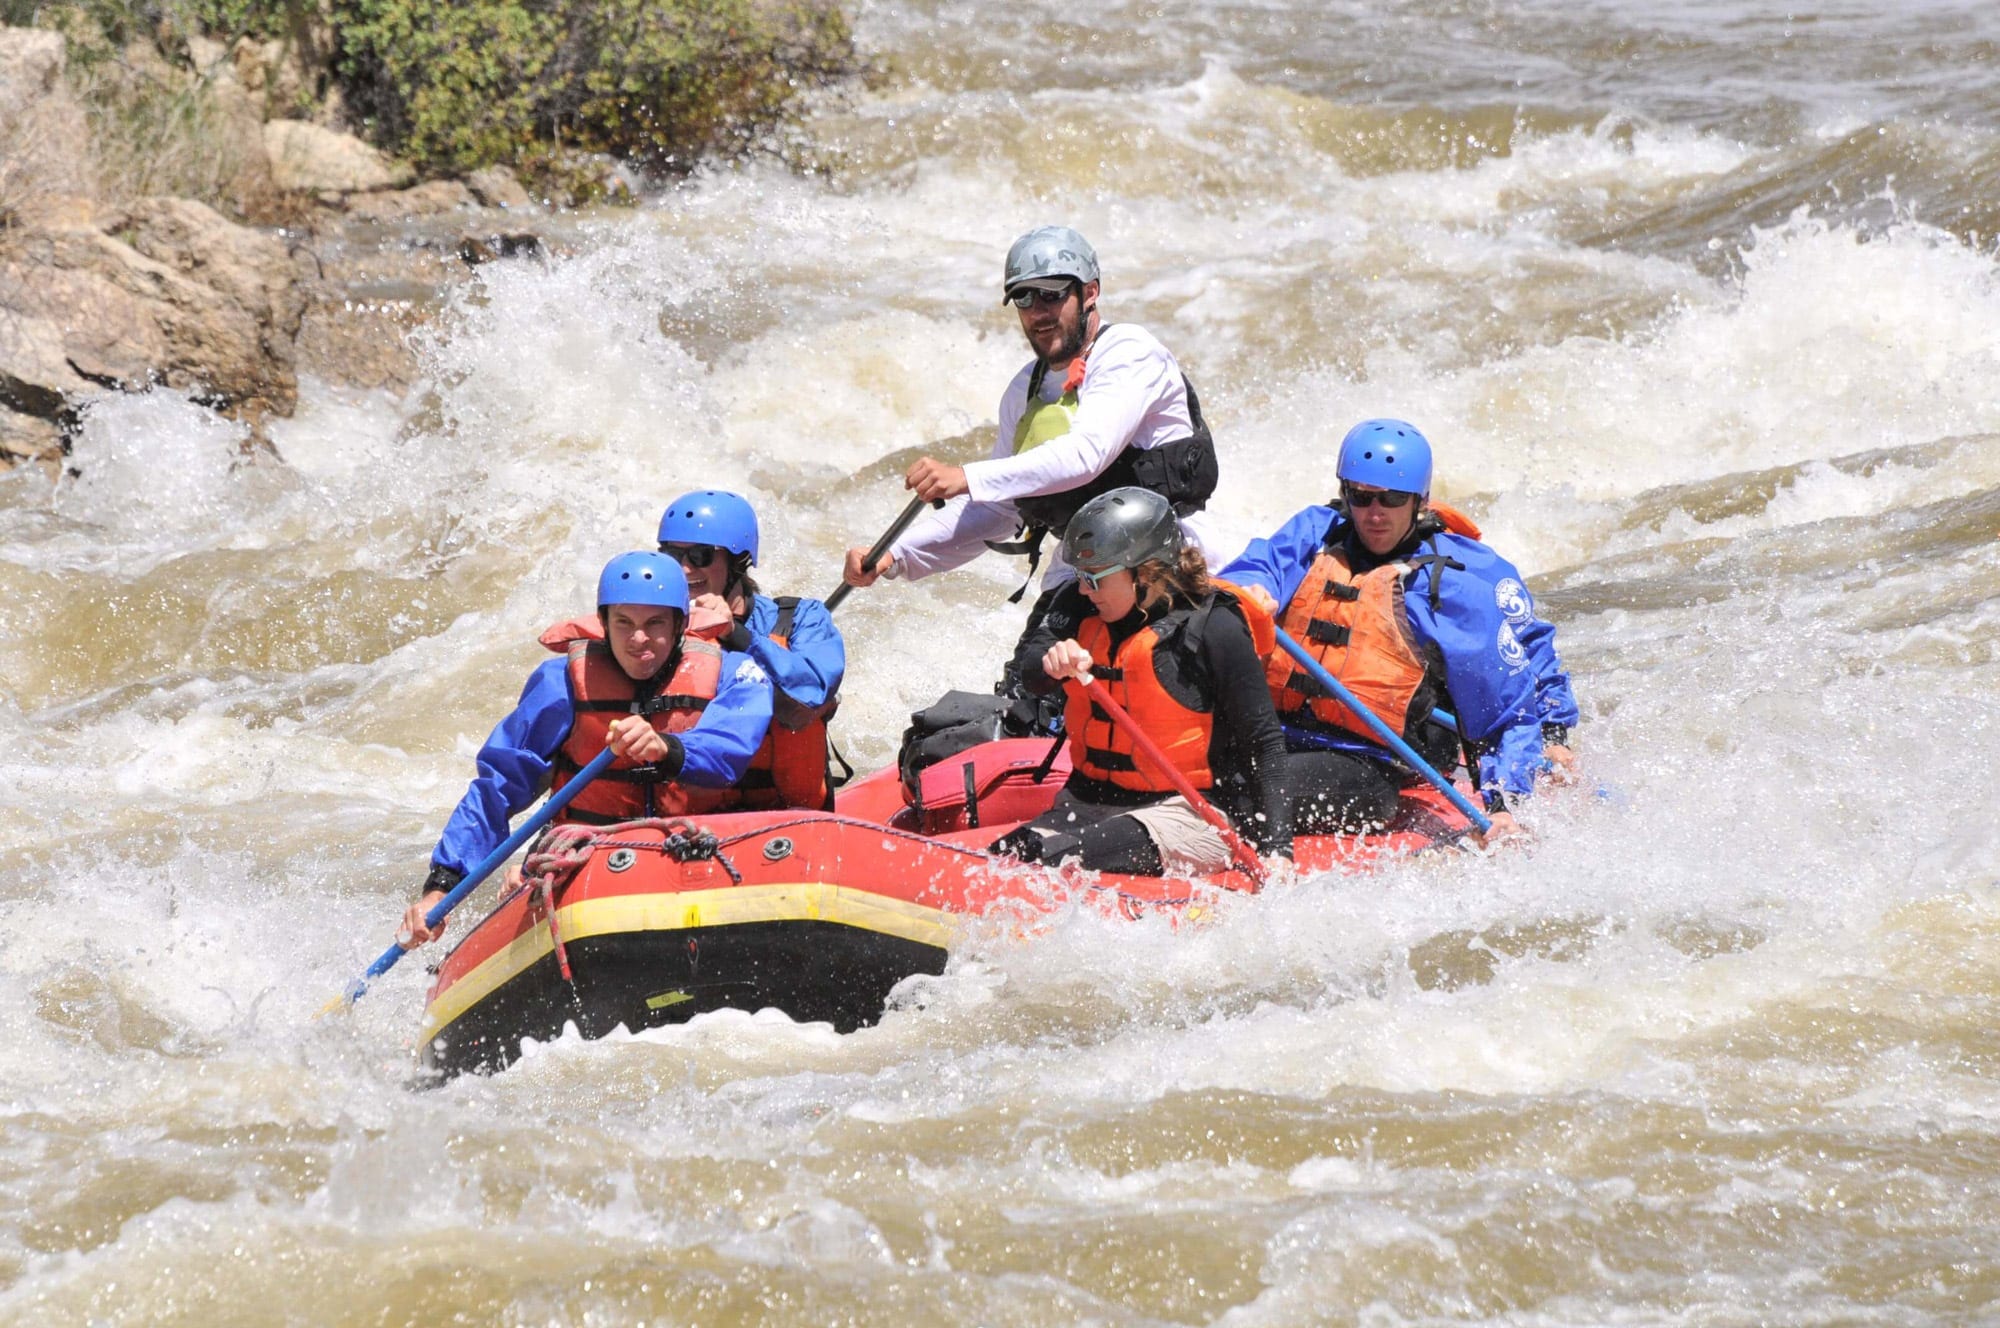 A group white water river rafting in Breckenridge, Colorado